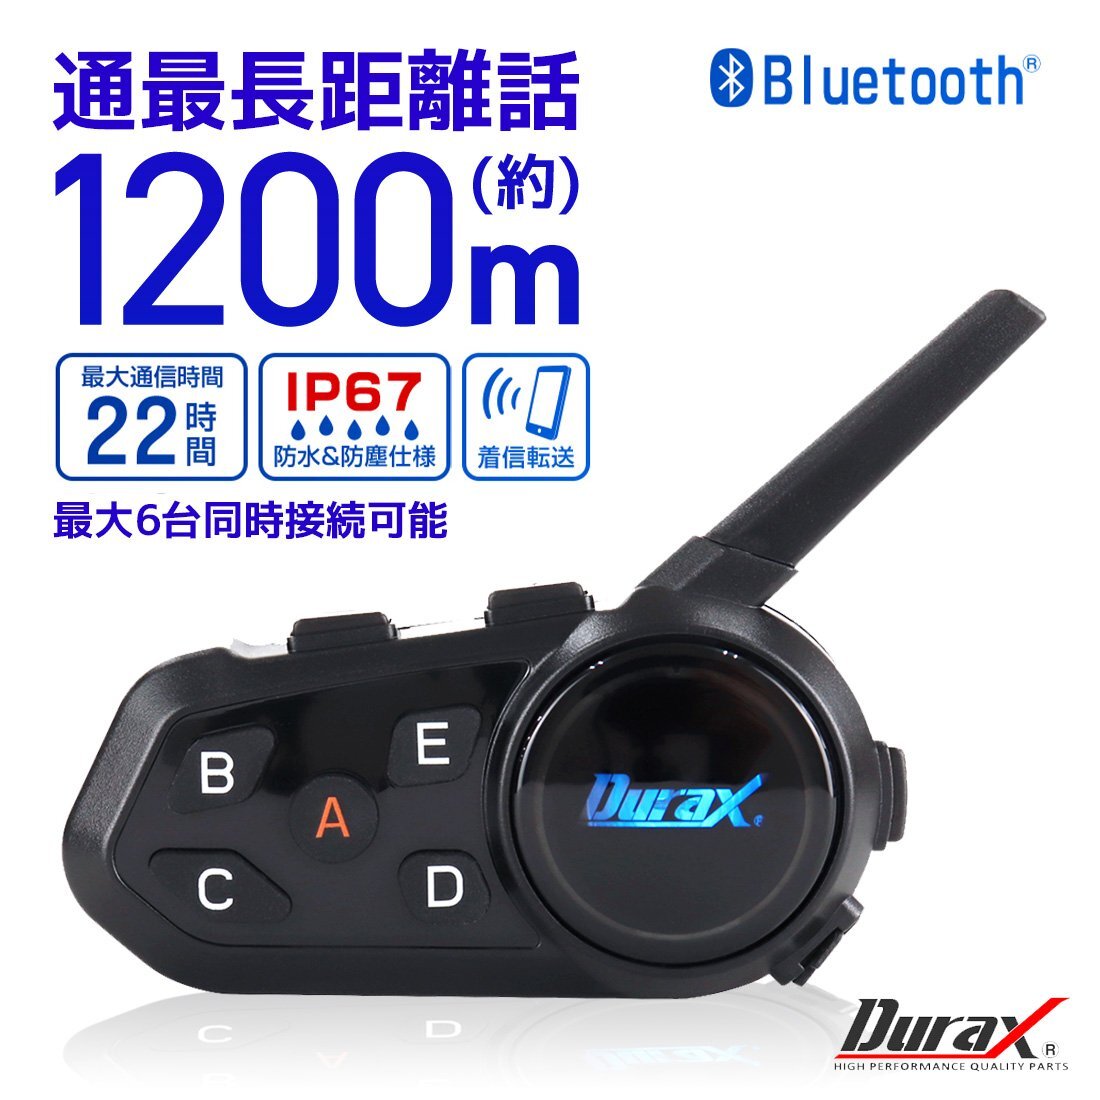  bike in cam maximum 6 person same time telephone call maximum telephone call distance 1200m IP67 waterproof dustproof bluetooth light weight for motorcycle bike in cam helmet transceiver new goods 